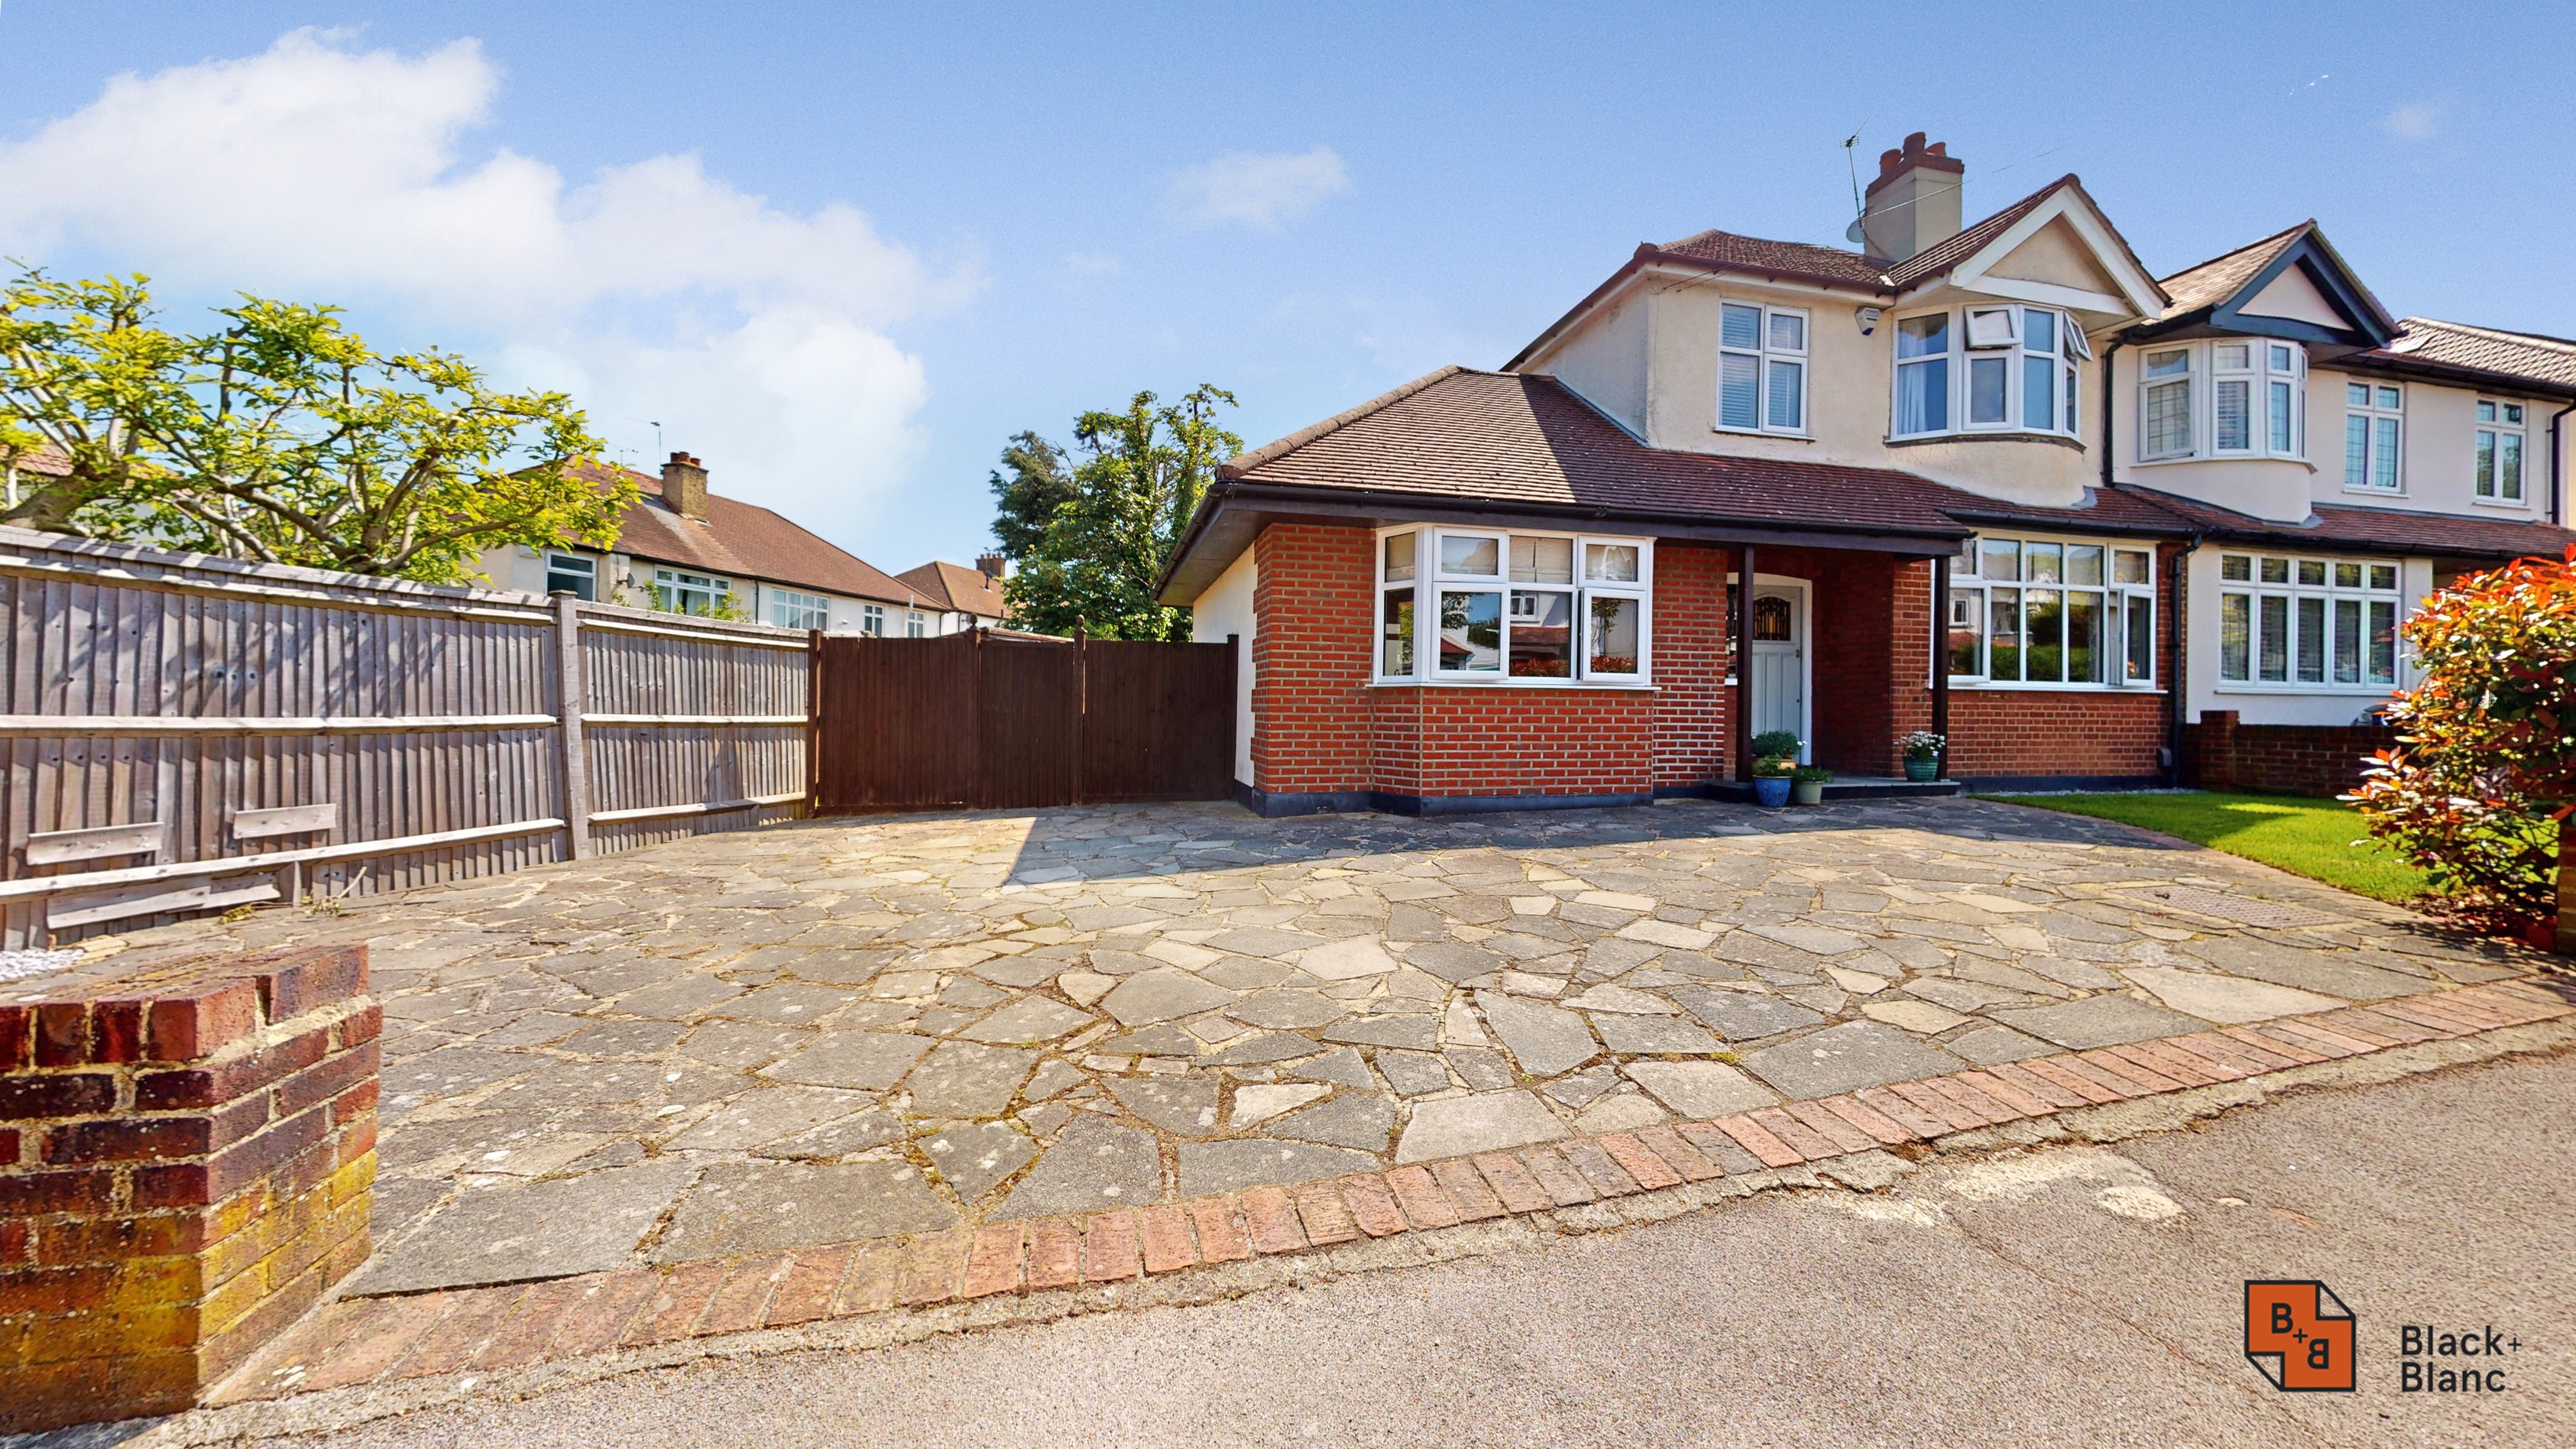 3 bed house for sale in Ash Grove, West Wickham - Property Image 1